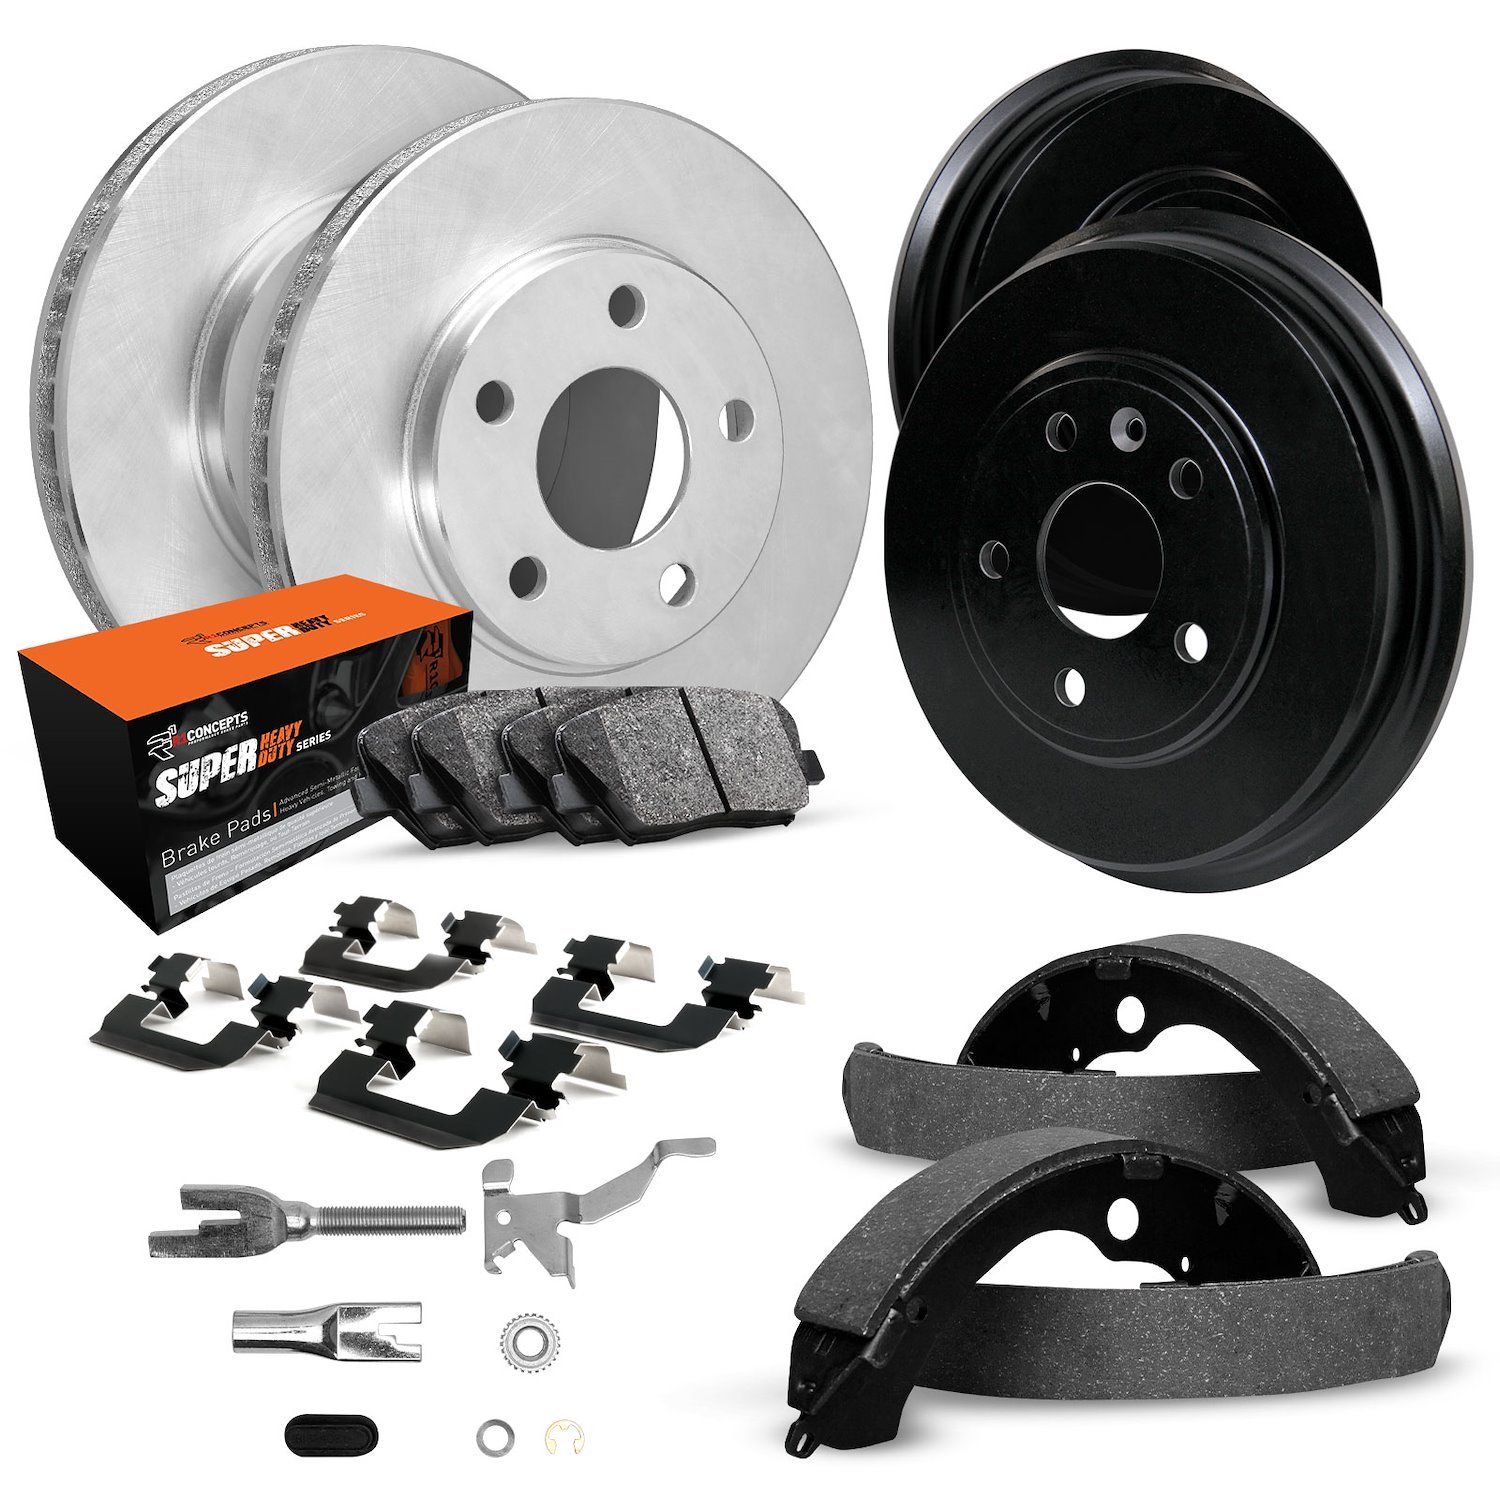 E-Line Blank Brake Rotor & Drum Set w/Super-Duty Pads, Shoes, Hardware, & Adjusters, 1969-1972 GM, Position: Front & Rear